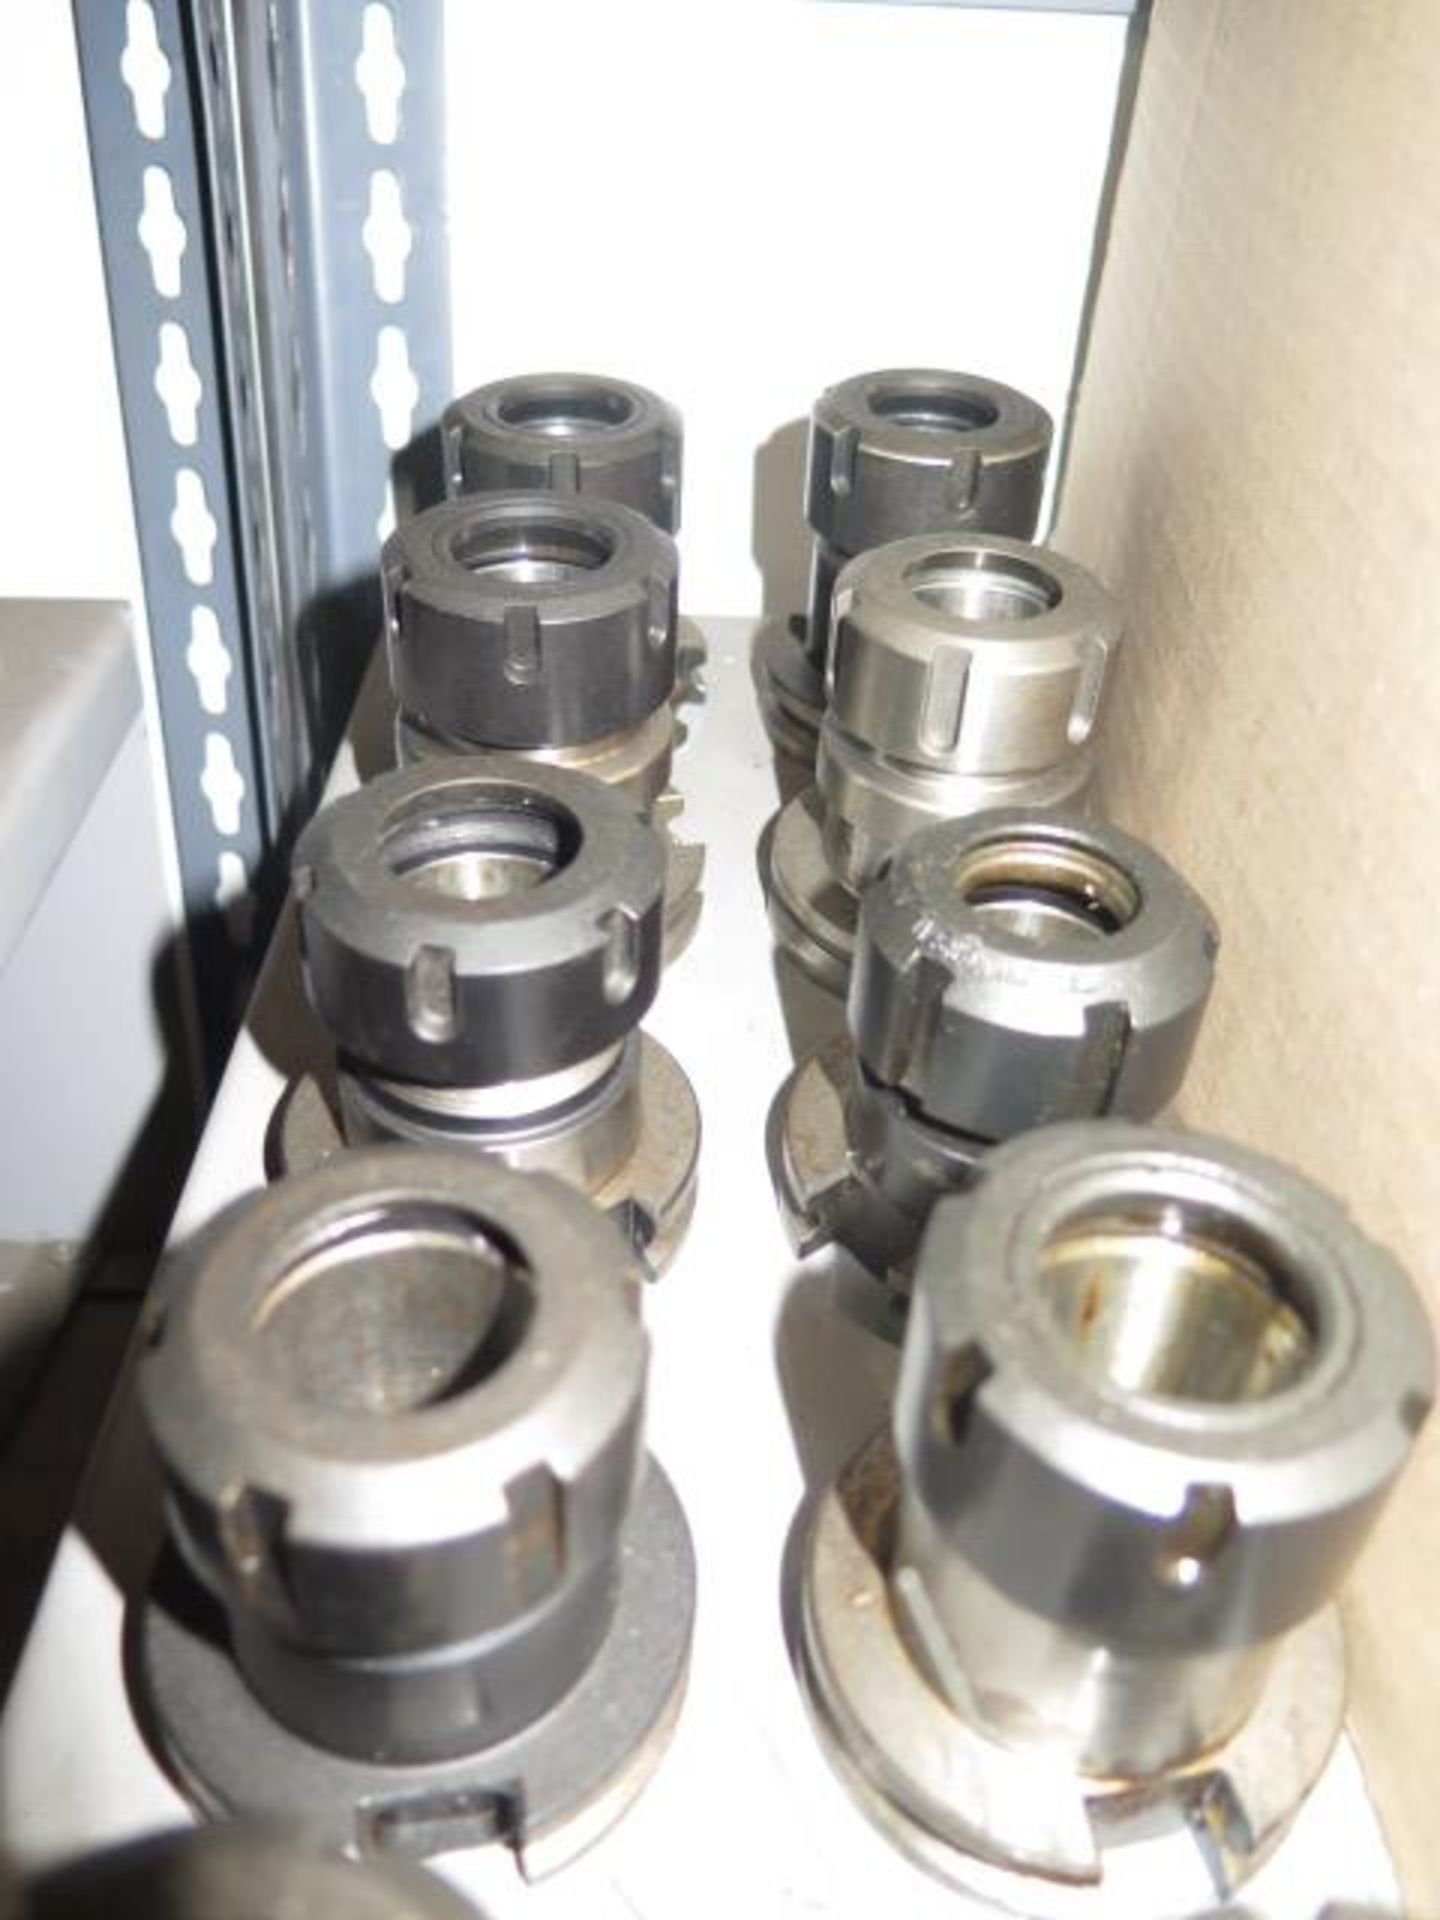 CAT-40 Taper Collet Chucks (10) (SOLD AS-IS - NO WARRANTY) - Image 2 of 3